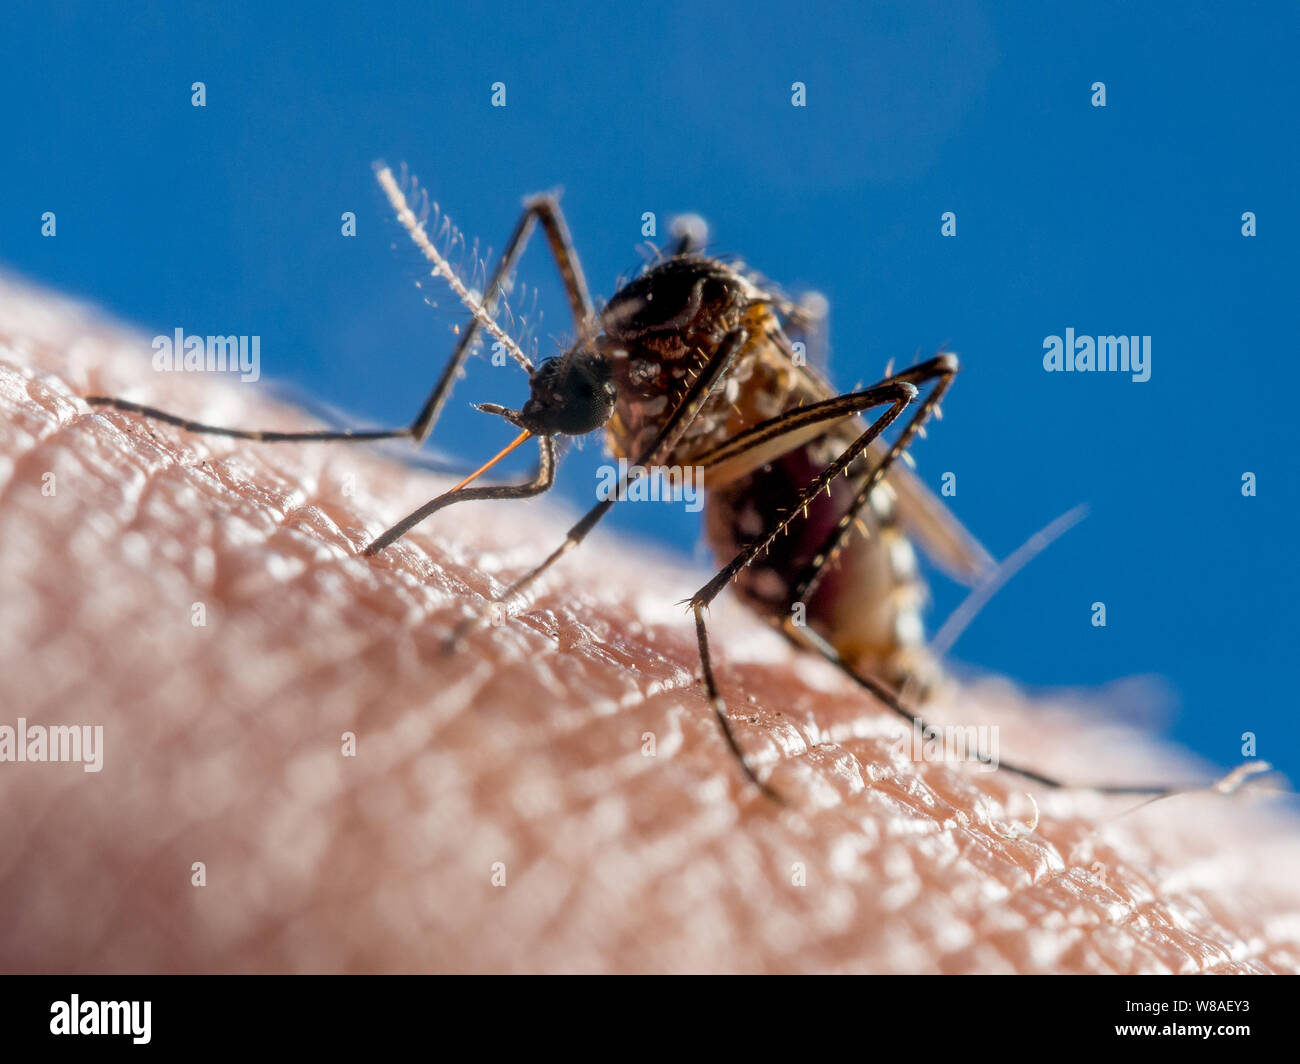 Close-up of a dengue fever mosquito (Aedes aegypti) feeding on human blood Stock Photo